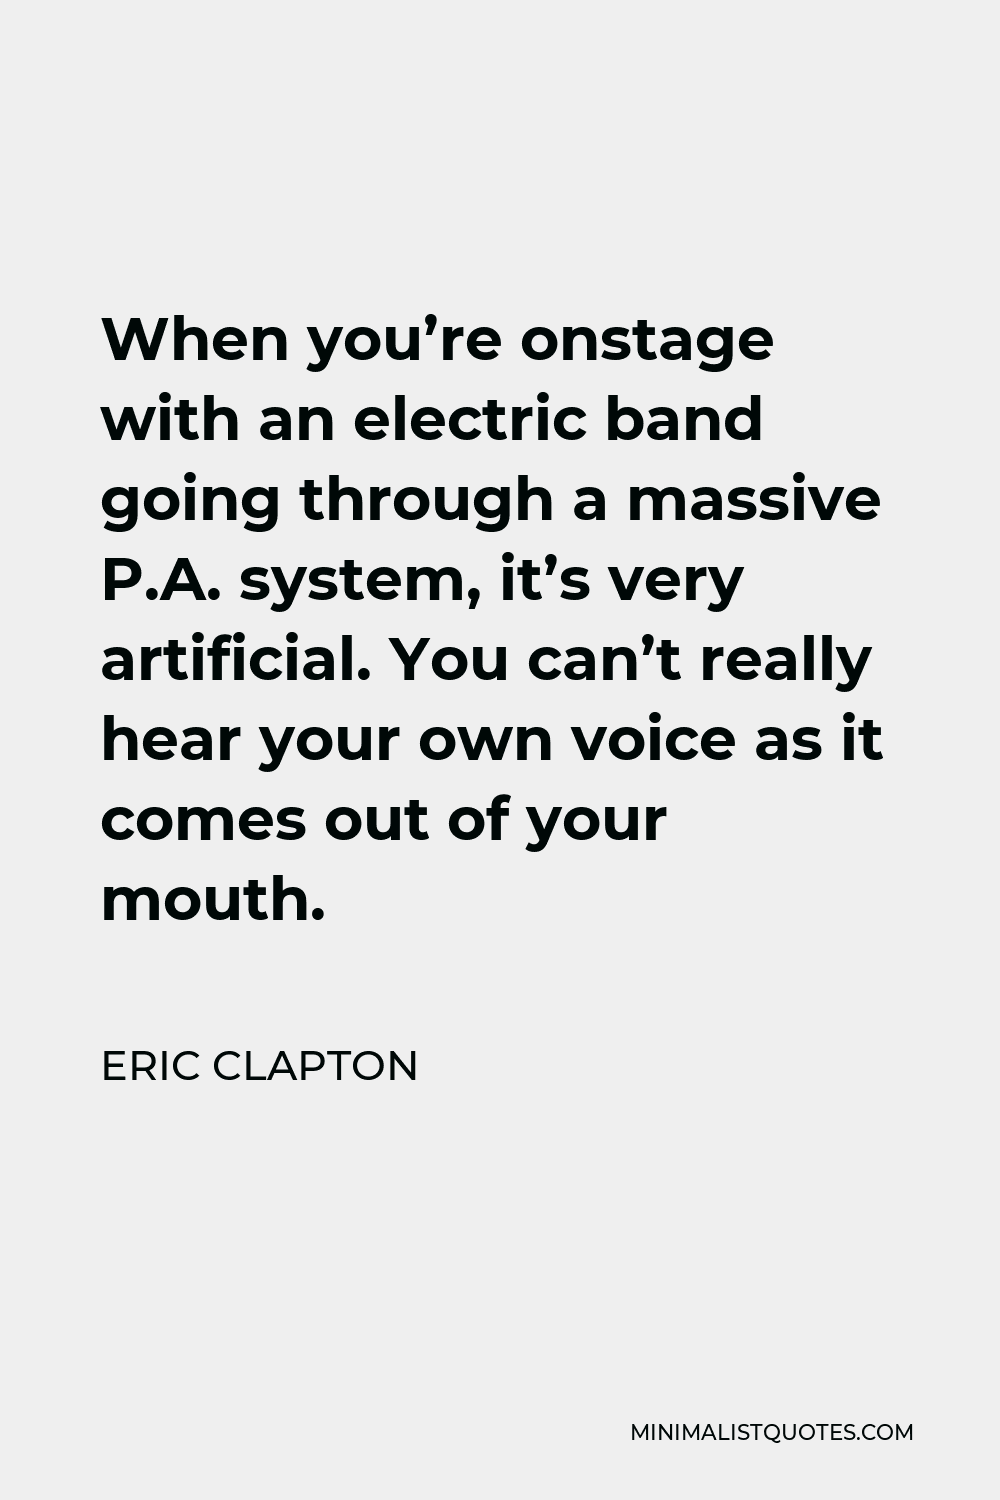 Eric Clapton Quote - When you’re onstage with an electric band going through a massive P.A. system, it’s very artificial. You can’t really hear your own voice as it comes out of your mouth.